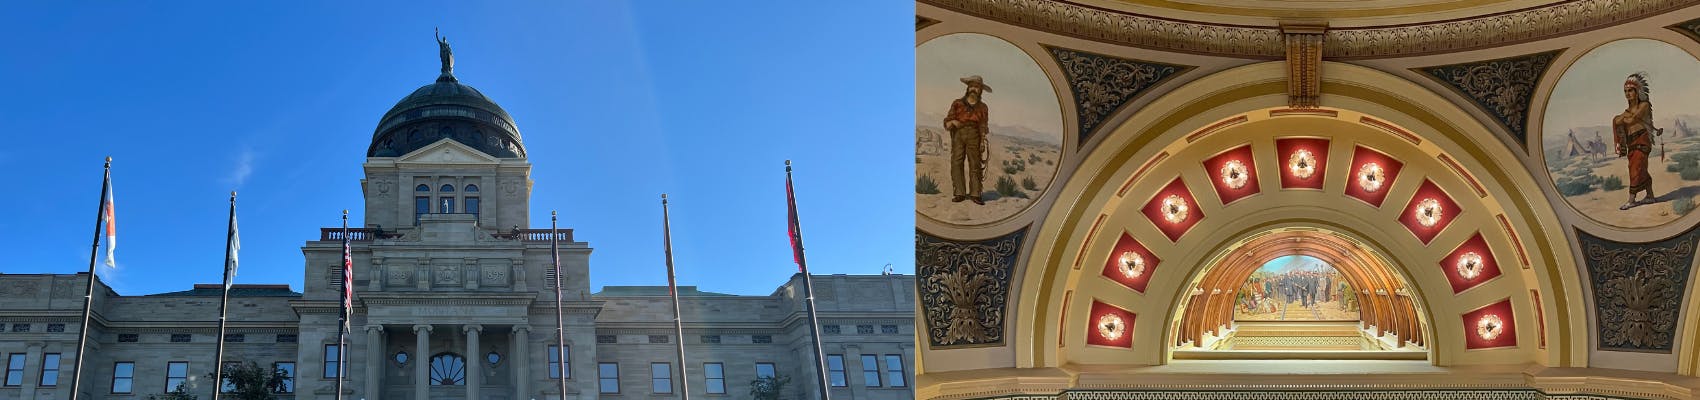 Outdoor view of Montana Capitol on left with indoor view of Montana Capitol dome on right